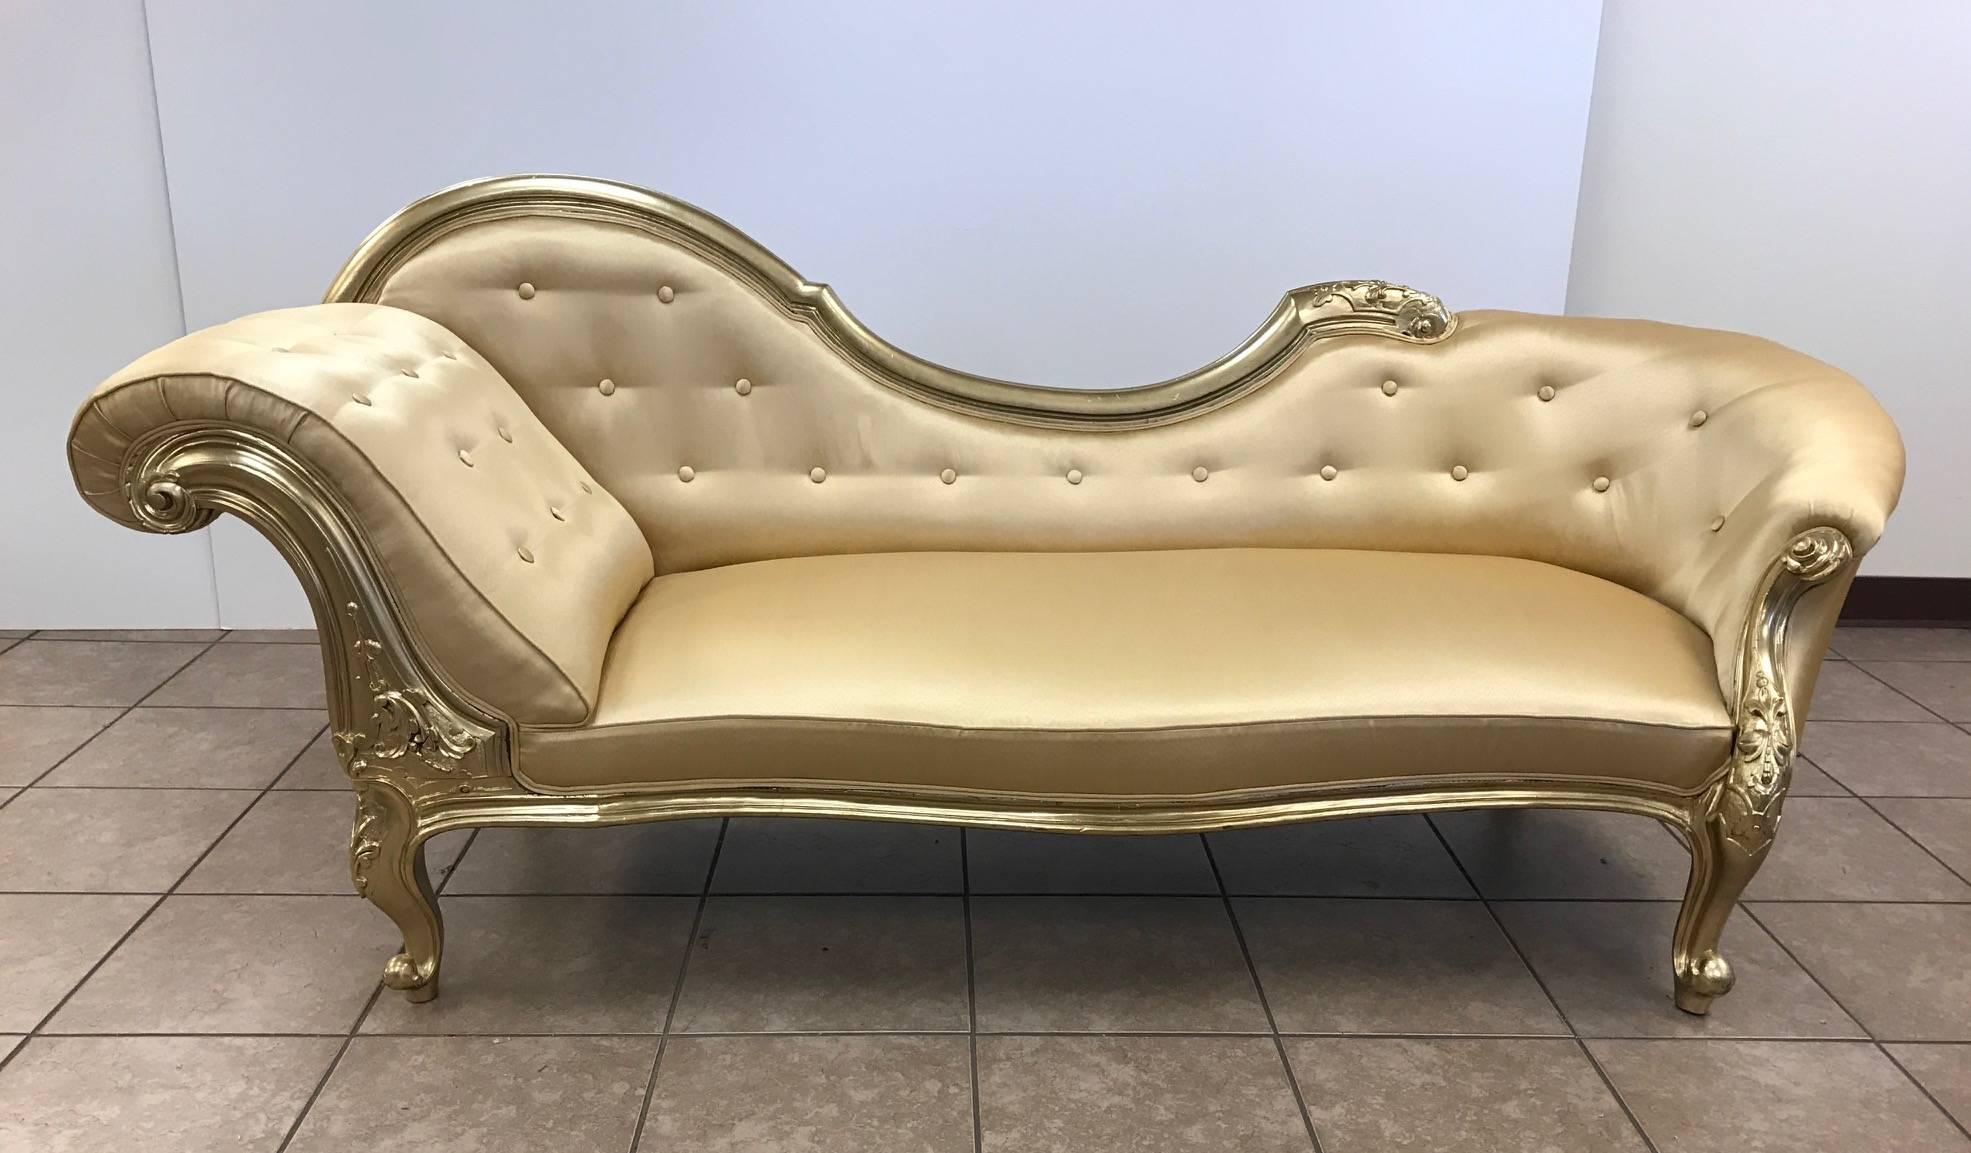 1880s Victorian carved walnut chaise lounge daybed painted in a metallic gold finish newly upholstered in gold satin.